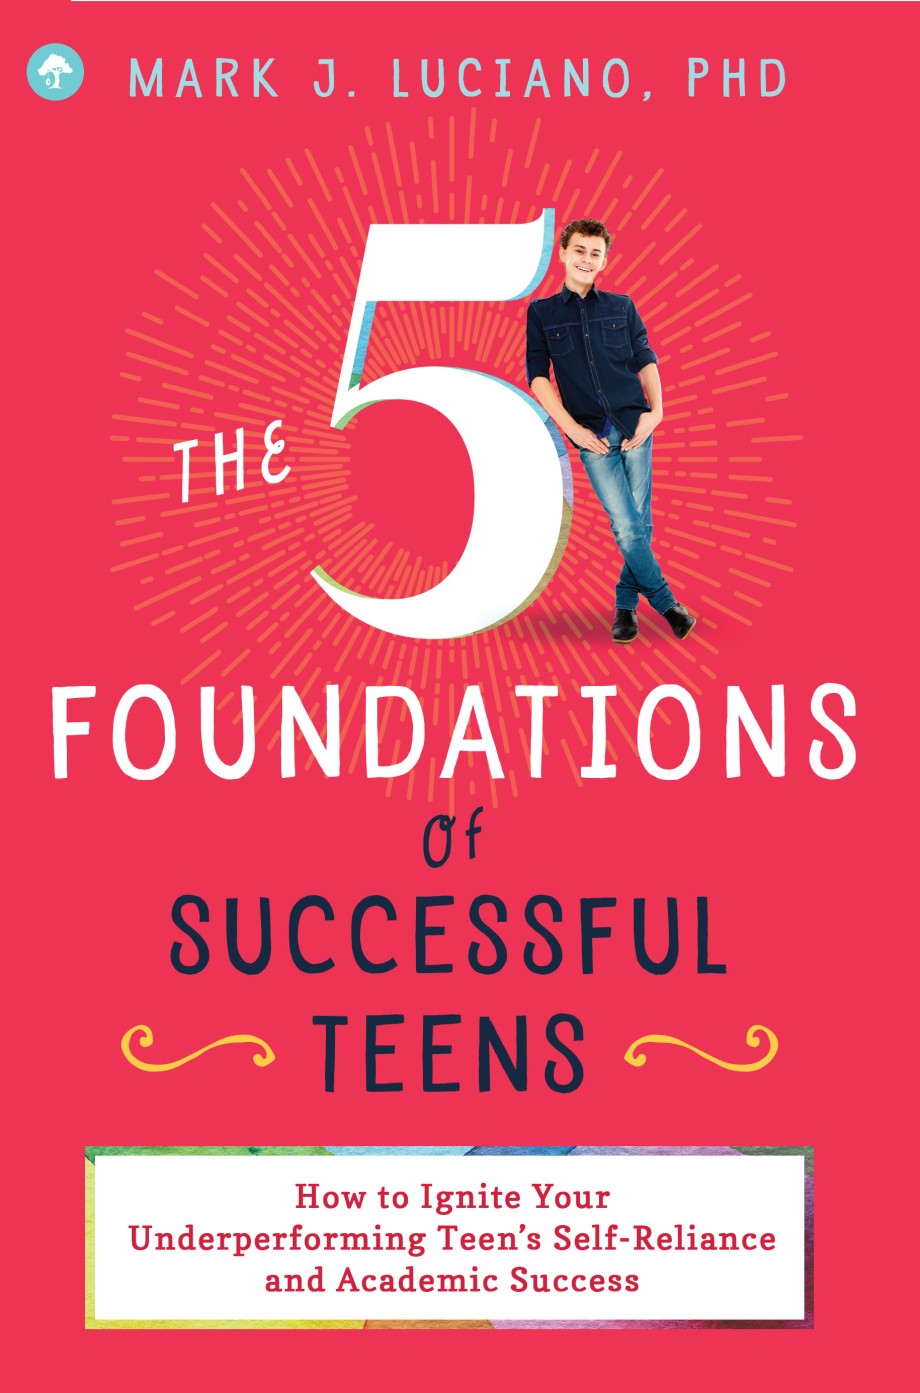 5 Foundations of Successful Teens How to Ignite Your Underperforming Teen's Self-Reliance and Academic Success